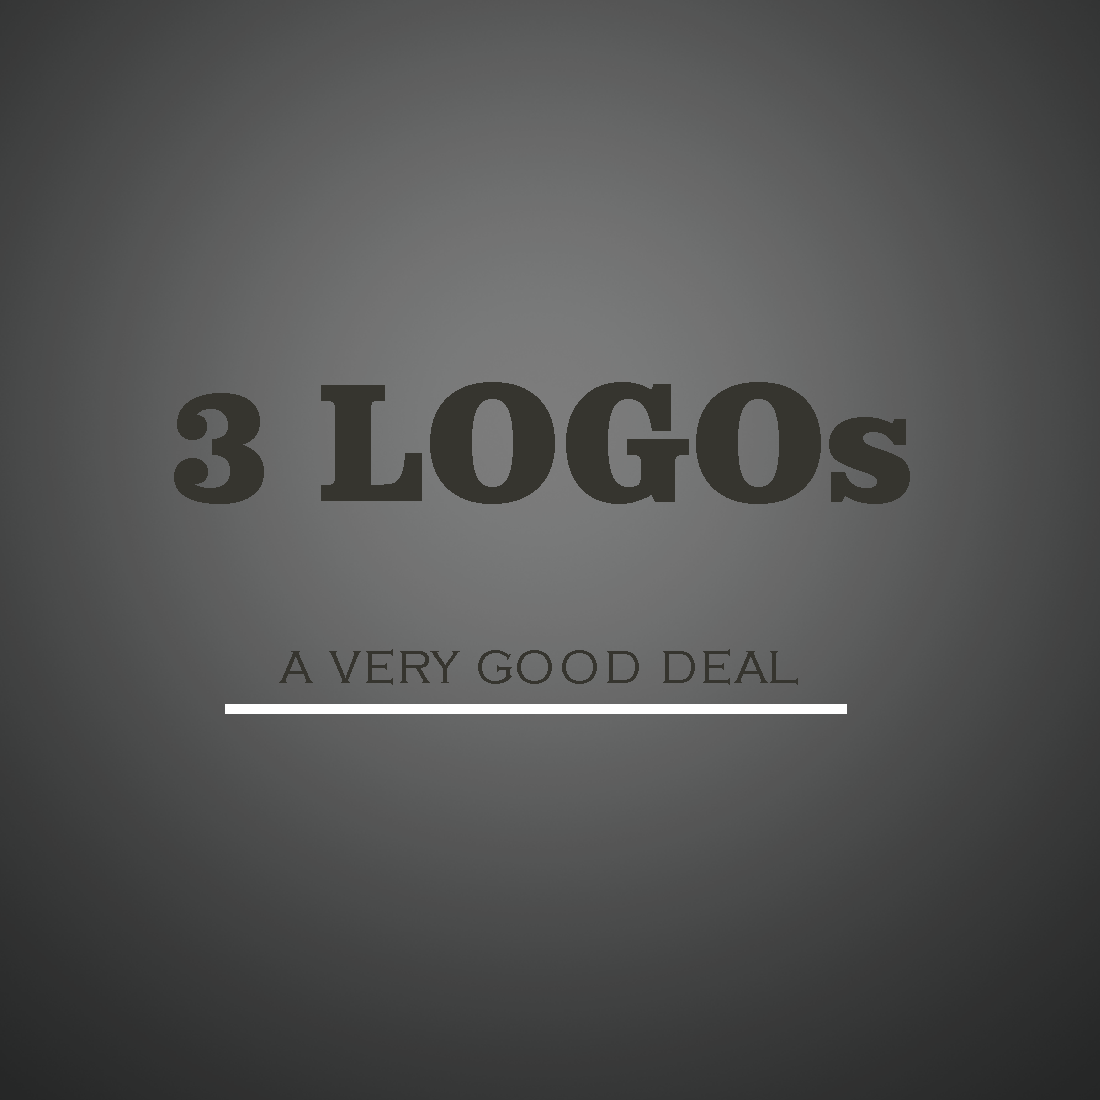 Three Different Logos Cover Image.